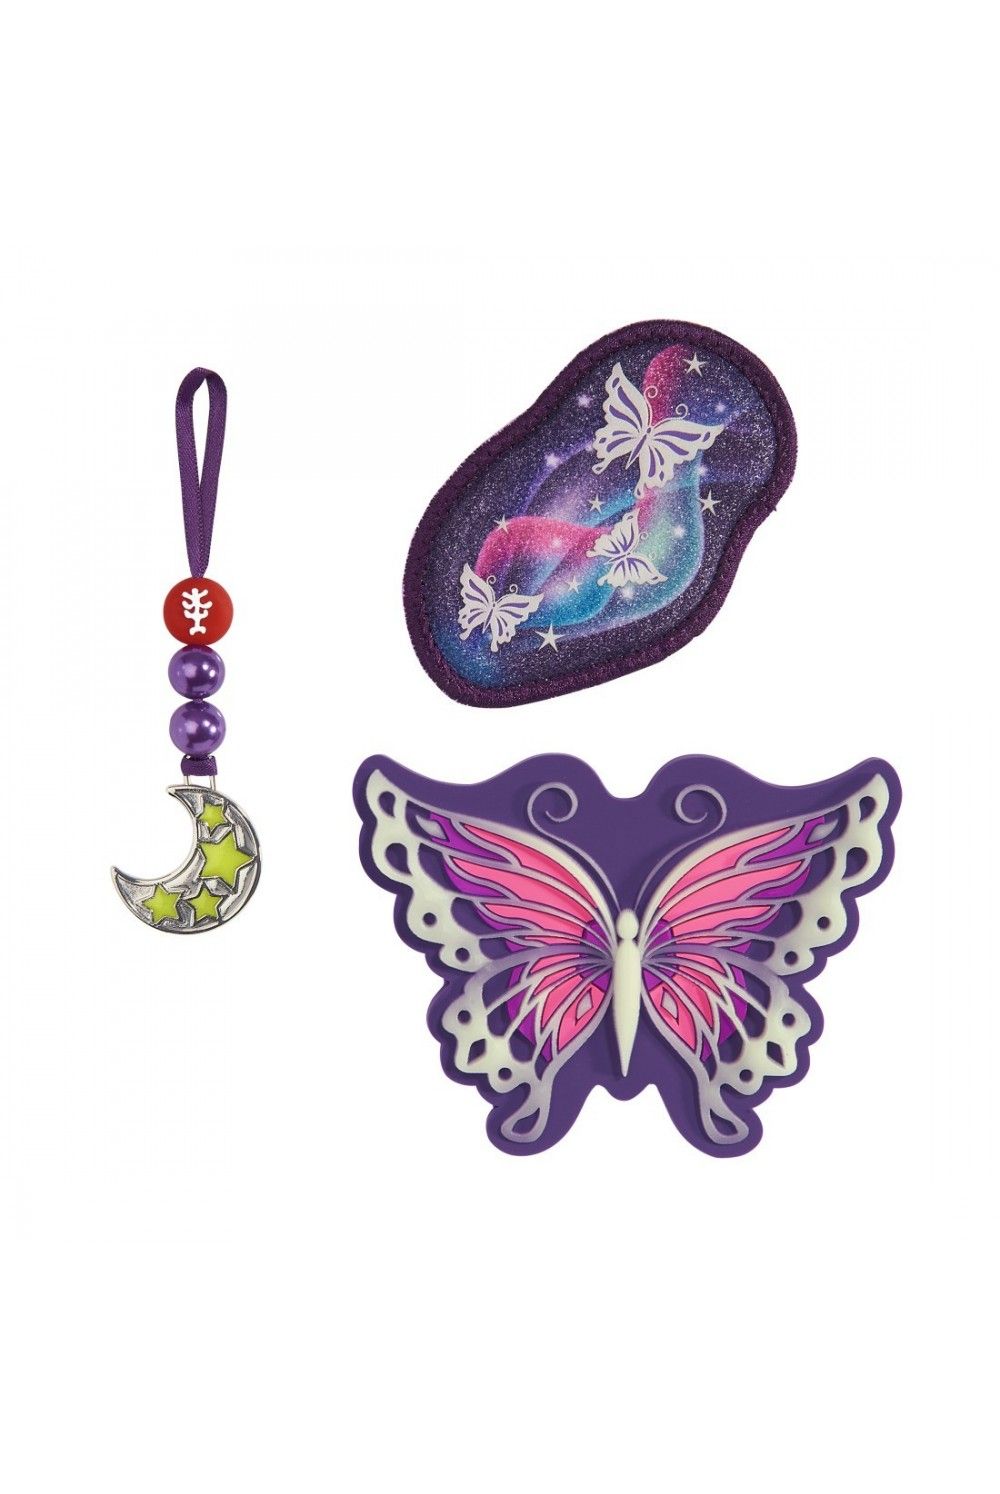 Step by Step Magnet Motif Magic Mags GLOW Butterfly Night